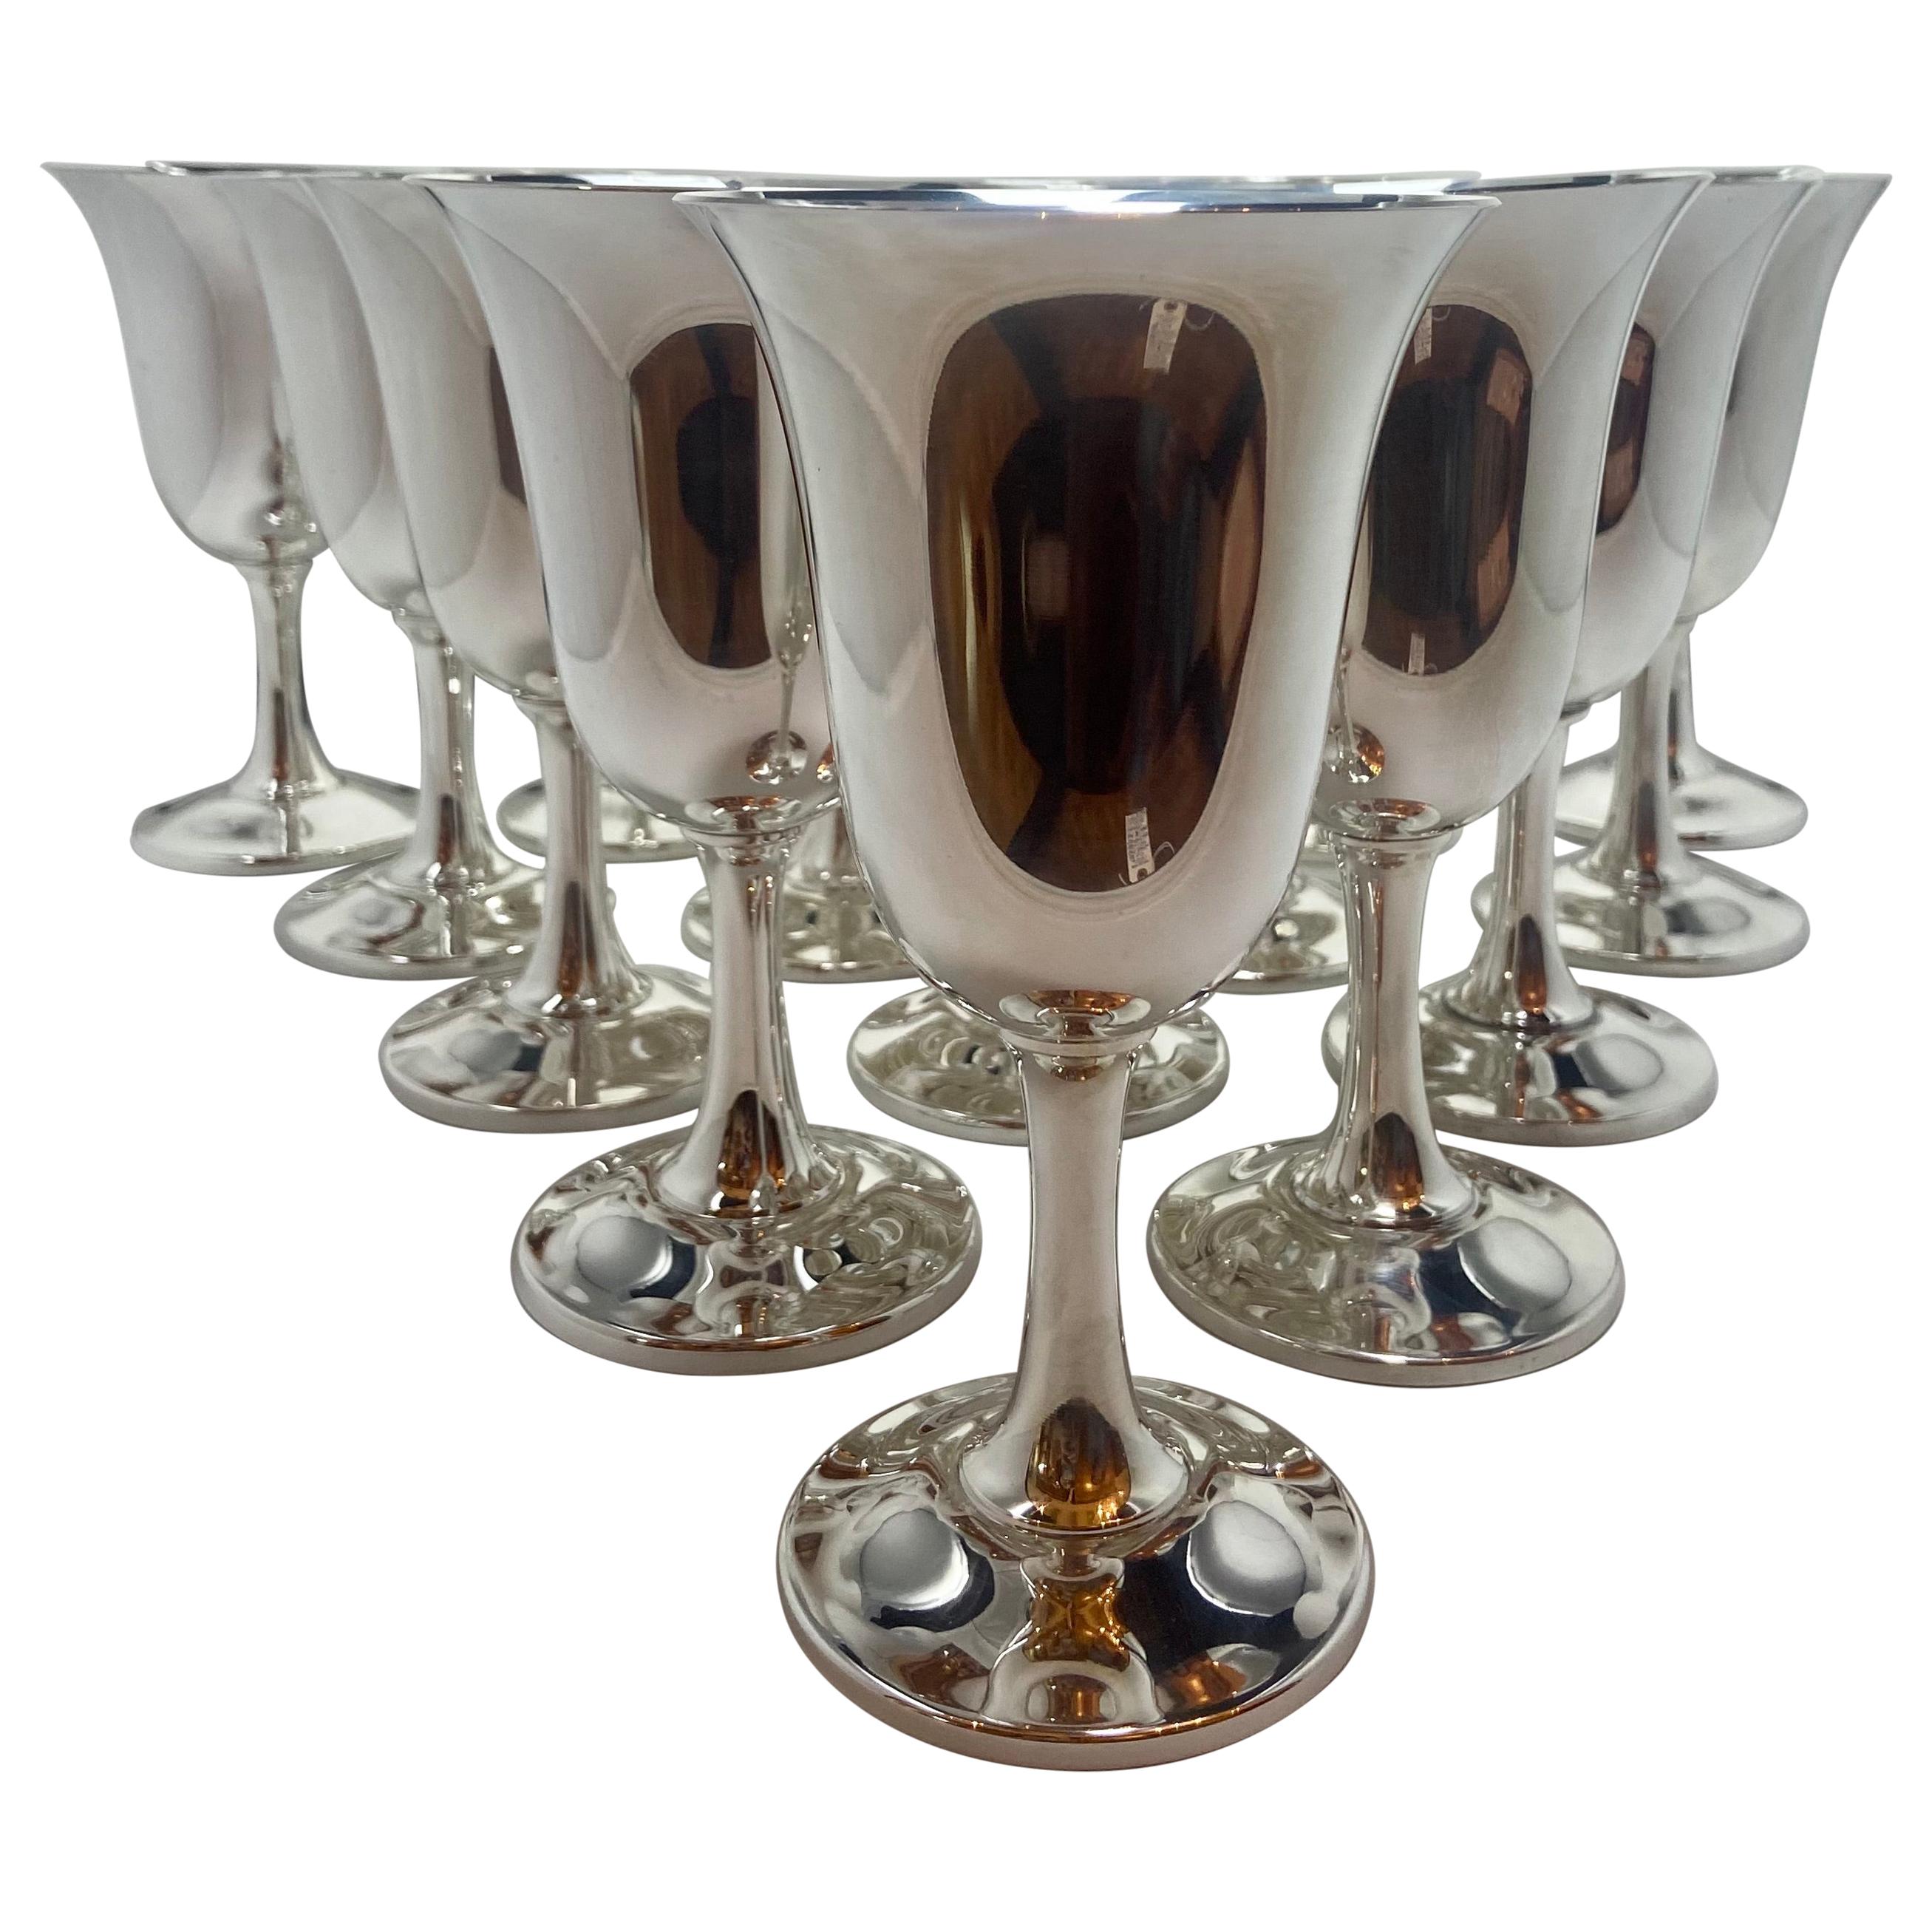 Set of 16 Estate American "Wallace Silversmiths" Sterling Silver Goblets, 1940's